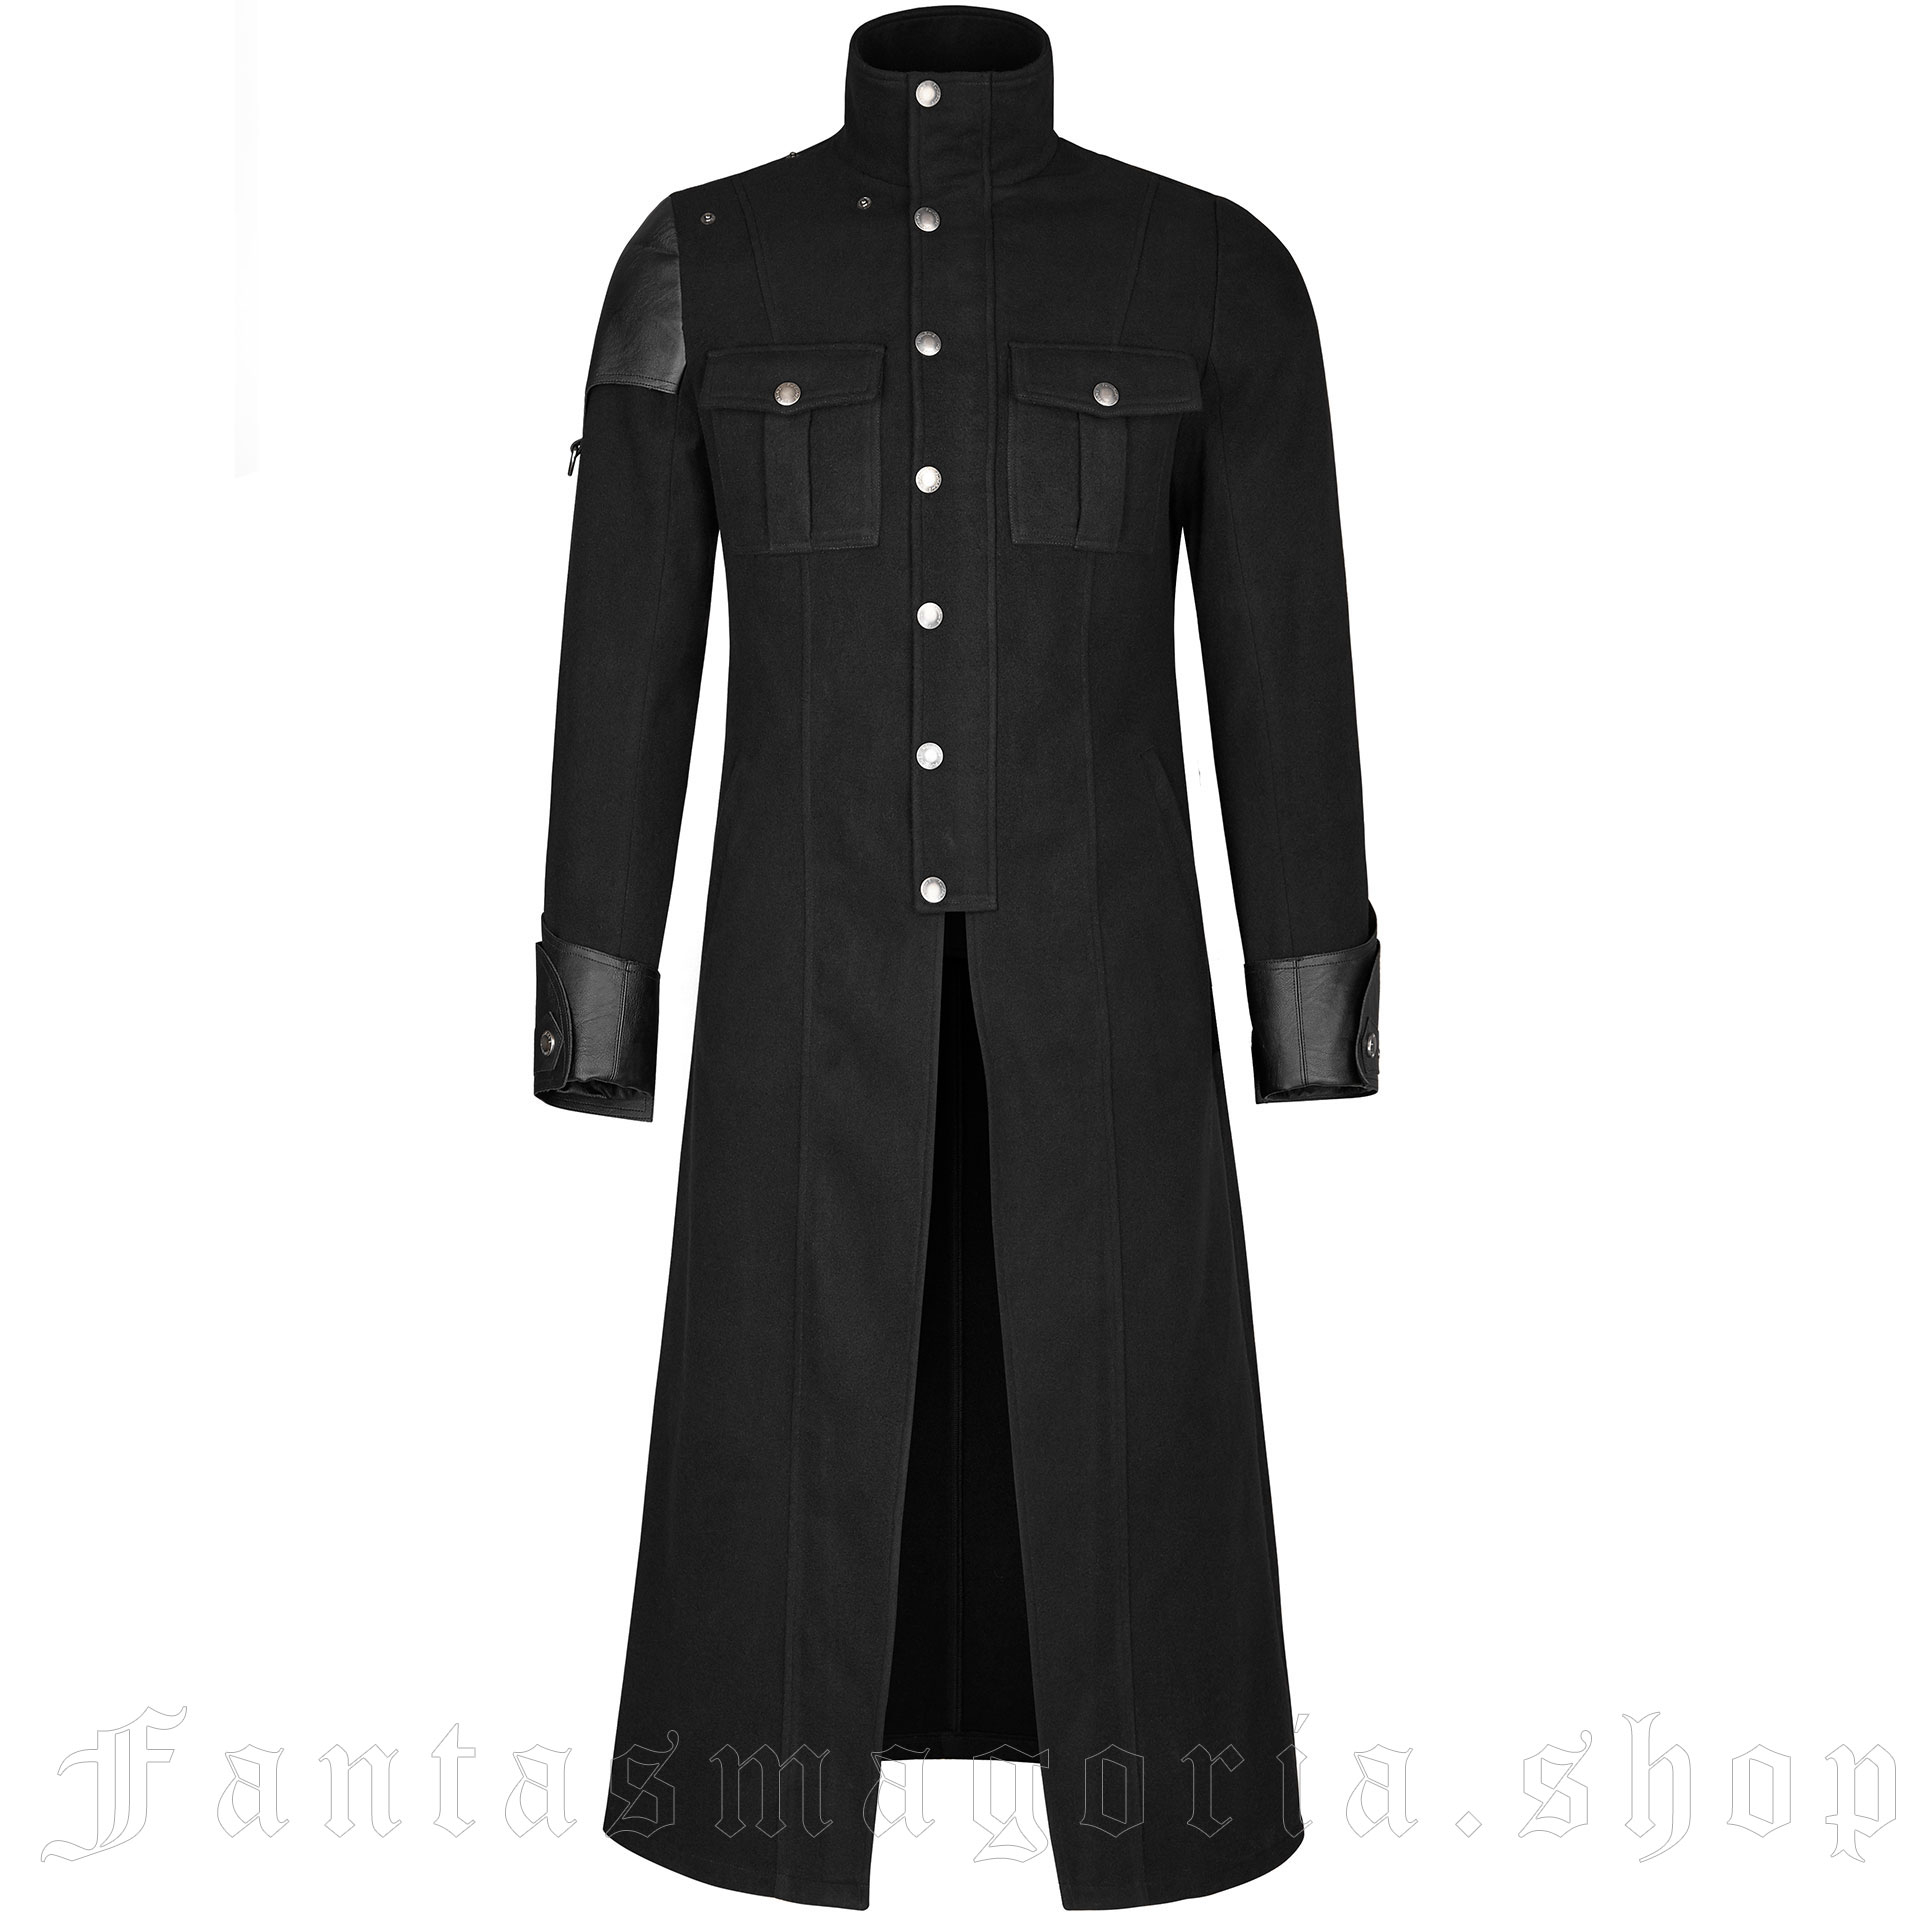 The Gothic Dynasty Coat by Punk Rave brand